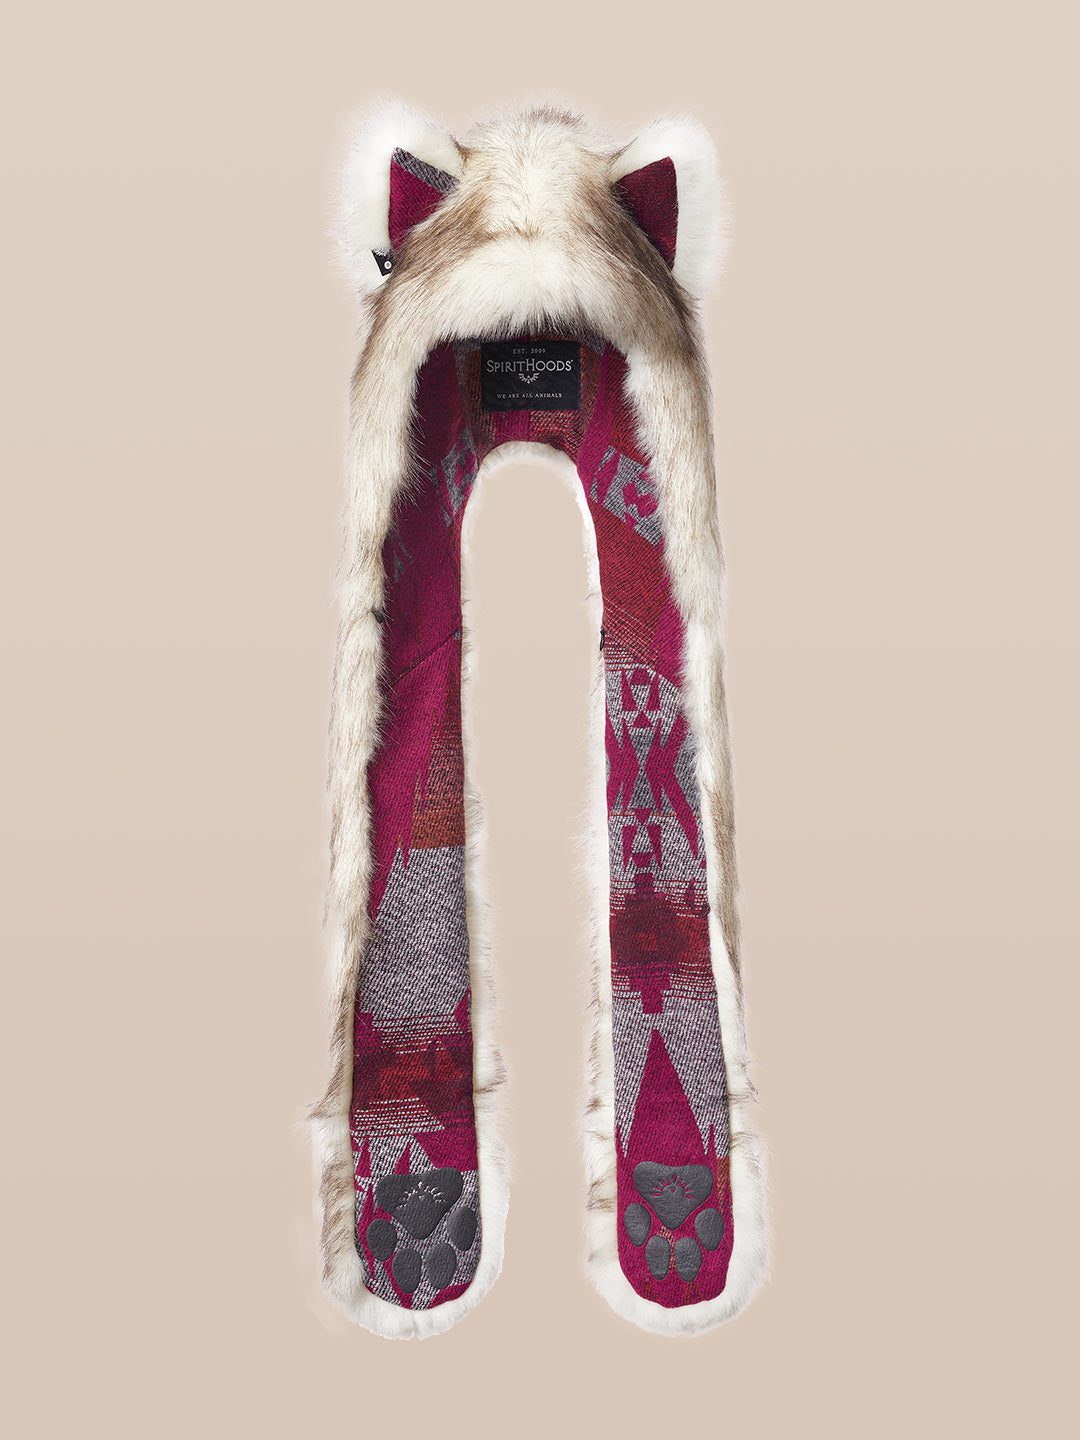 Limited edition faux fur Brown Husky Italy C.E. SpiritHood